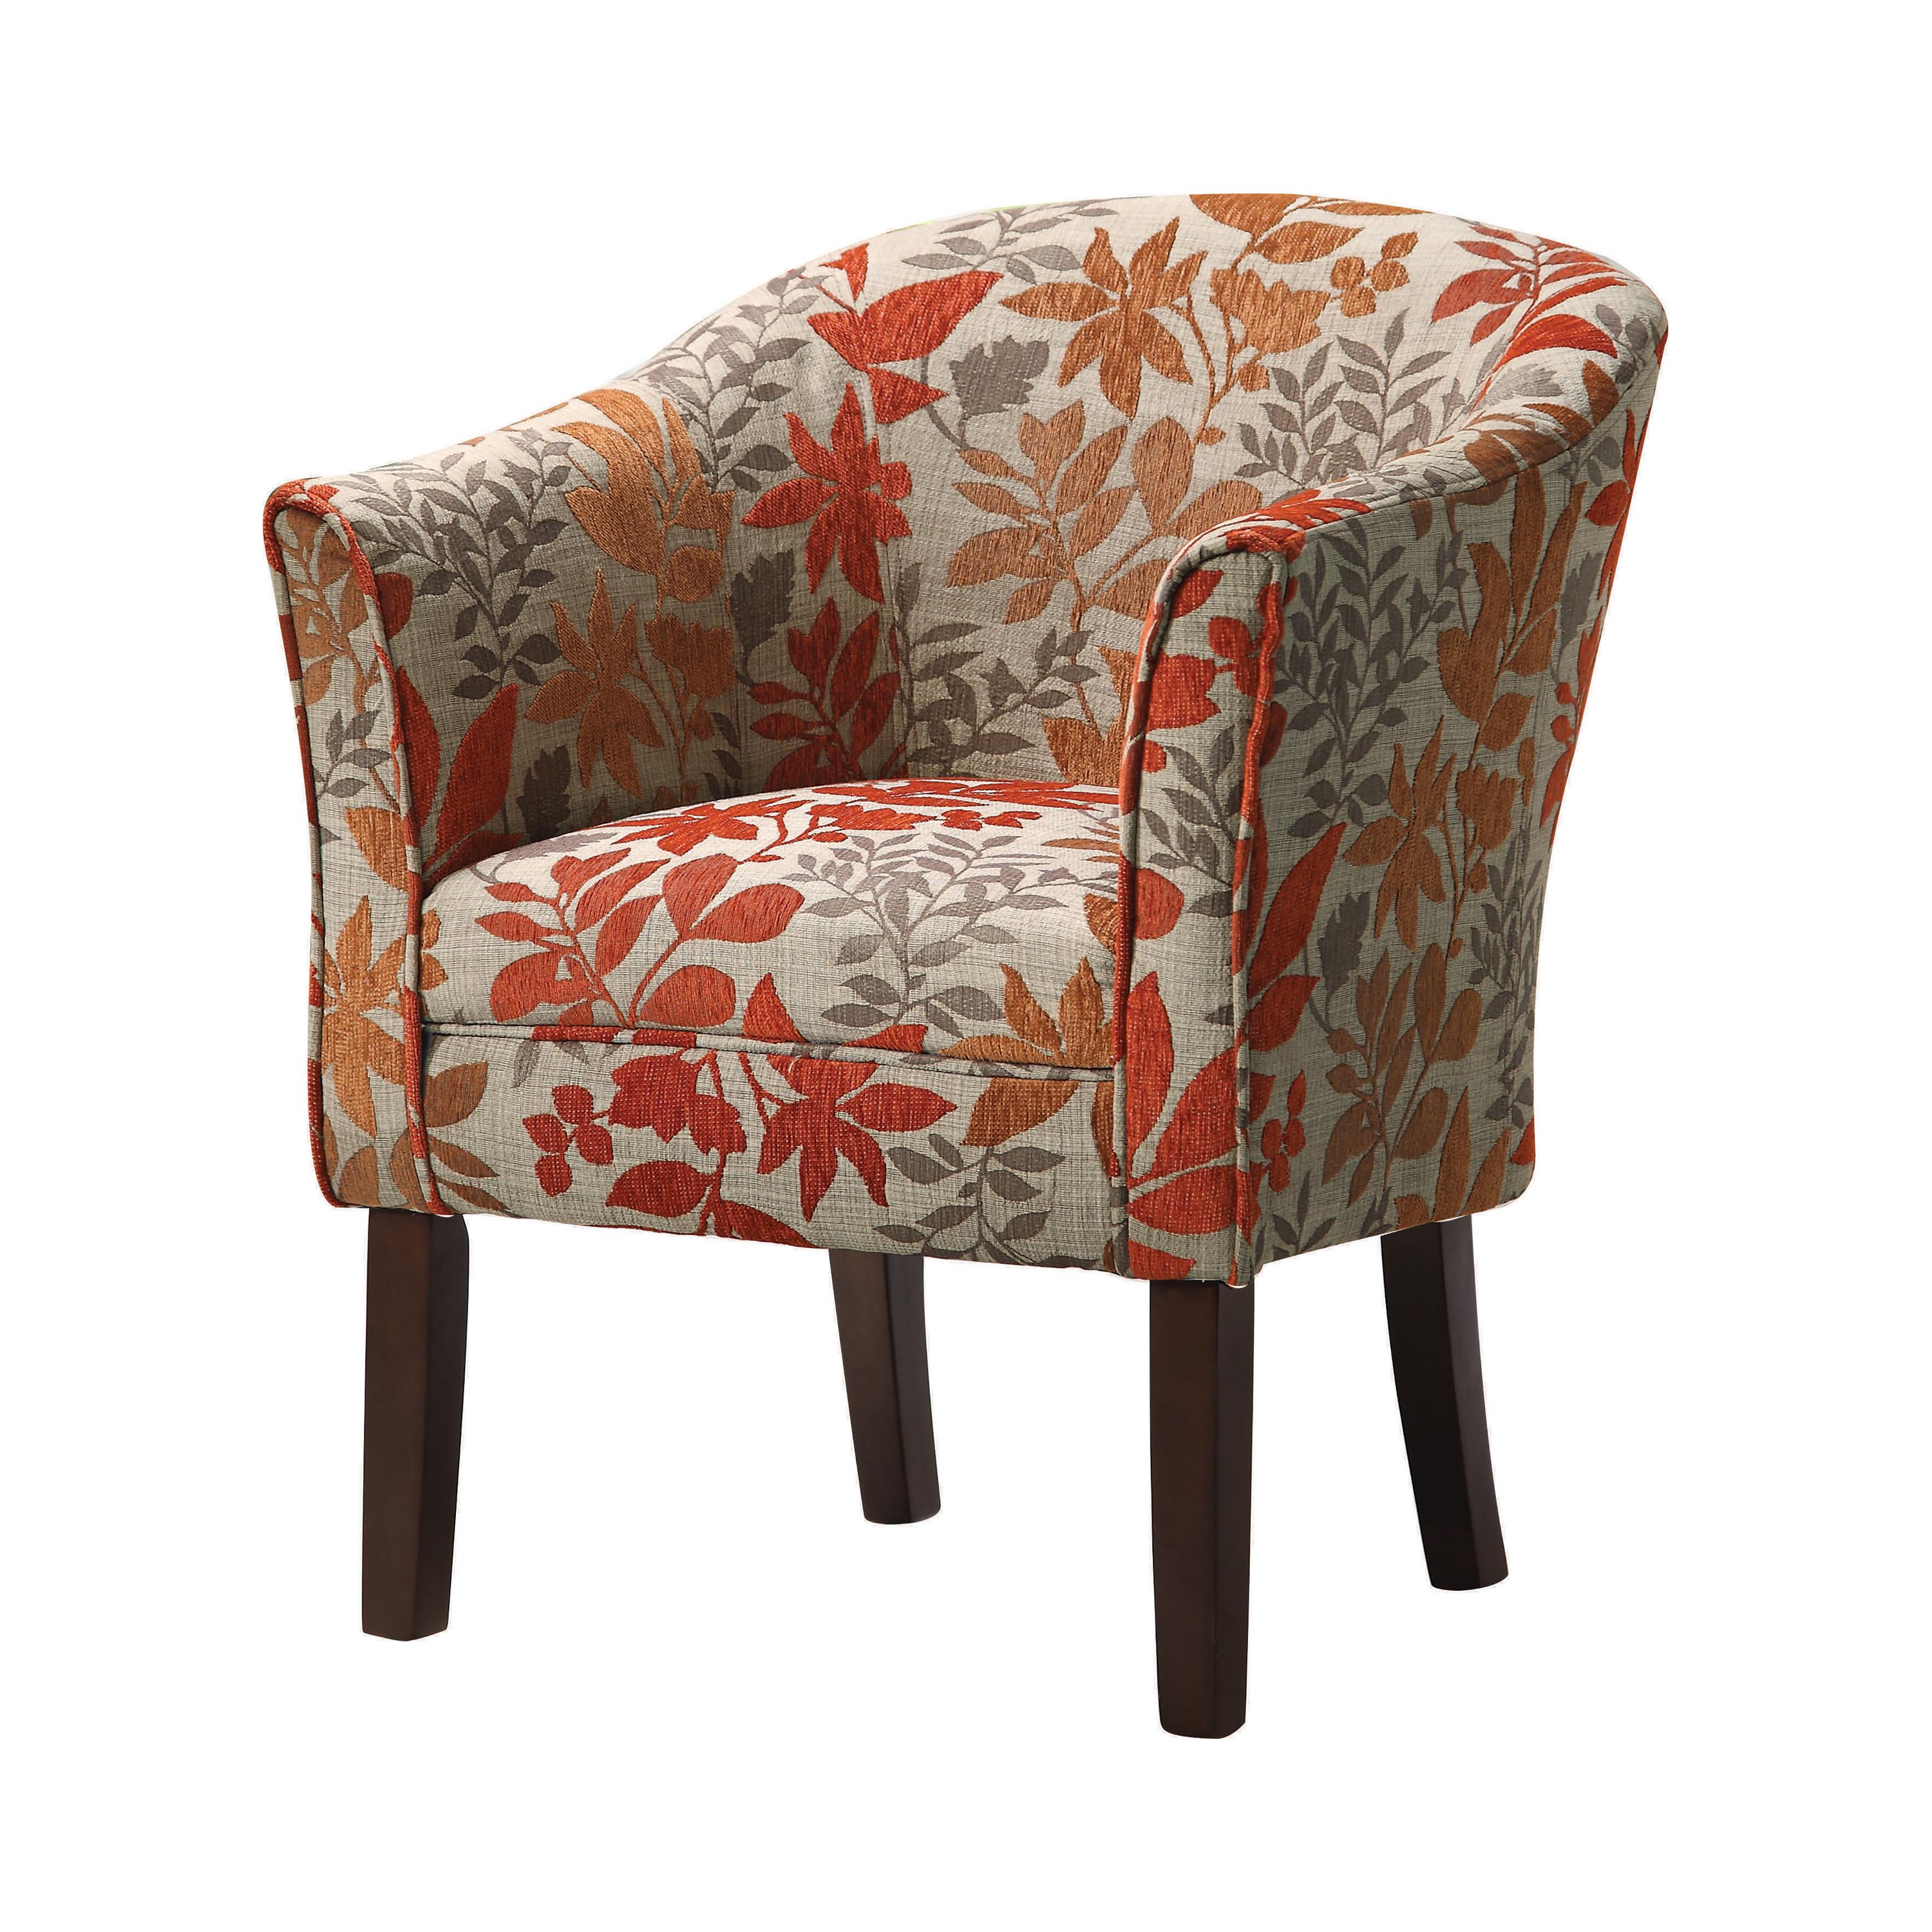 Transitional Accent Chair 460407 460407 in Red, Beige 